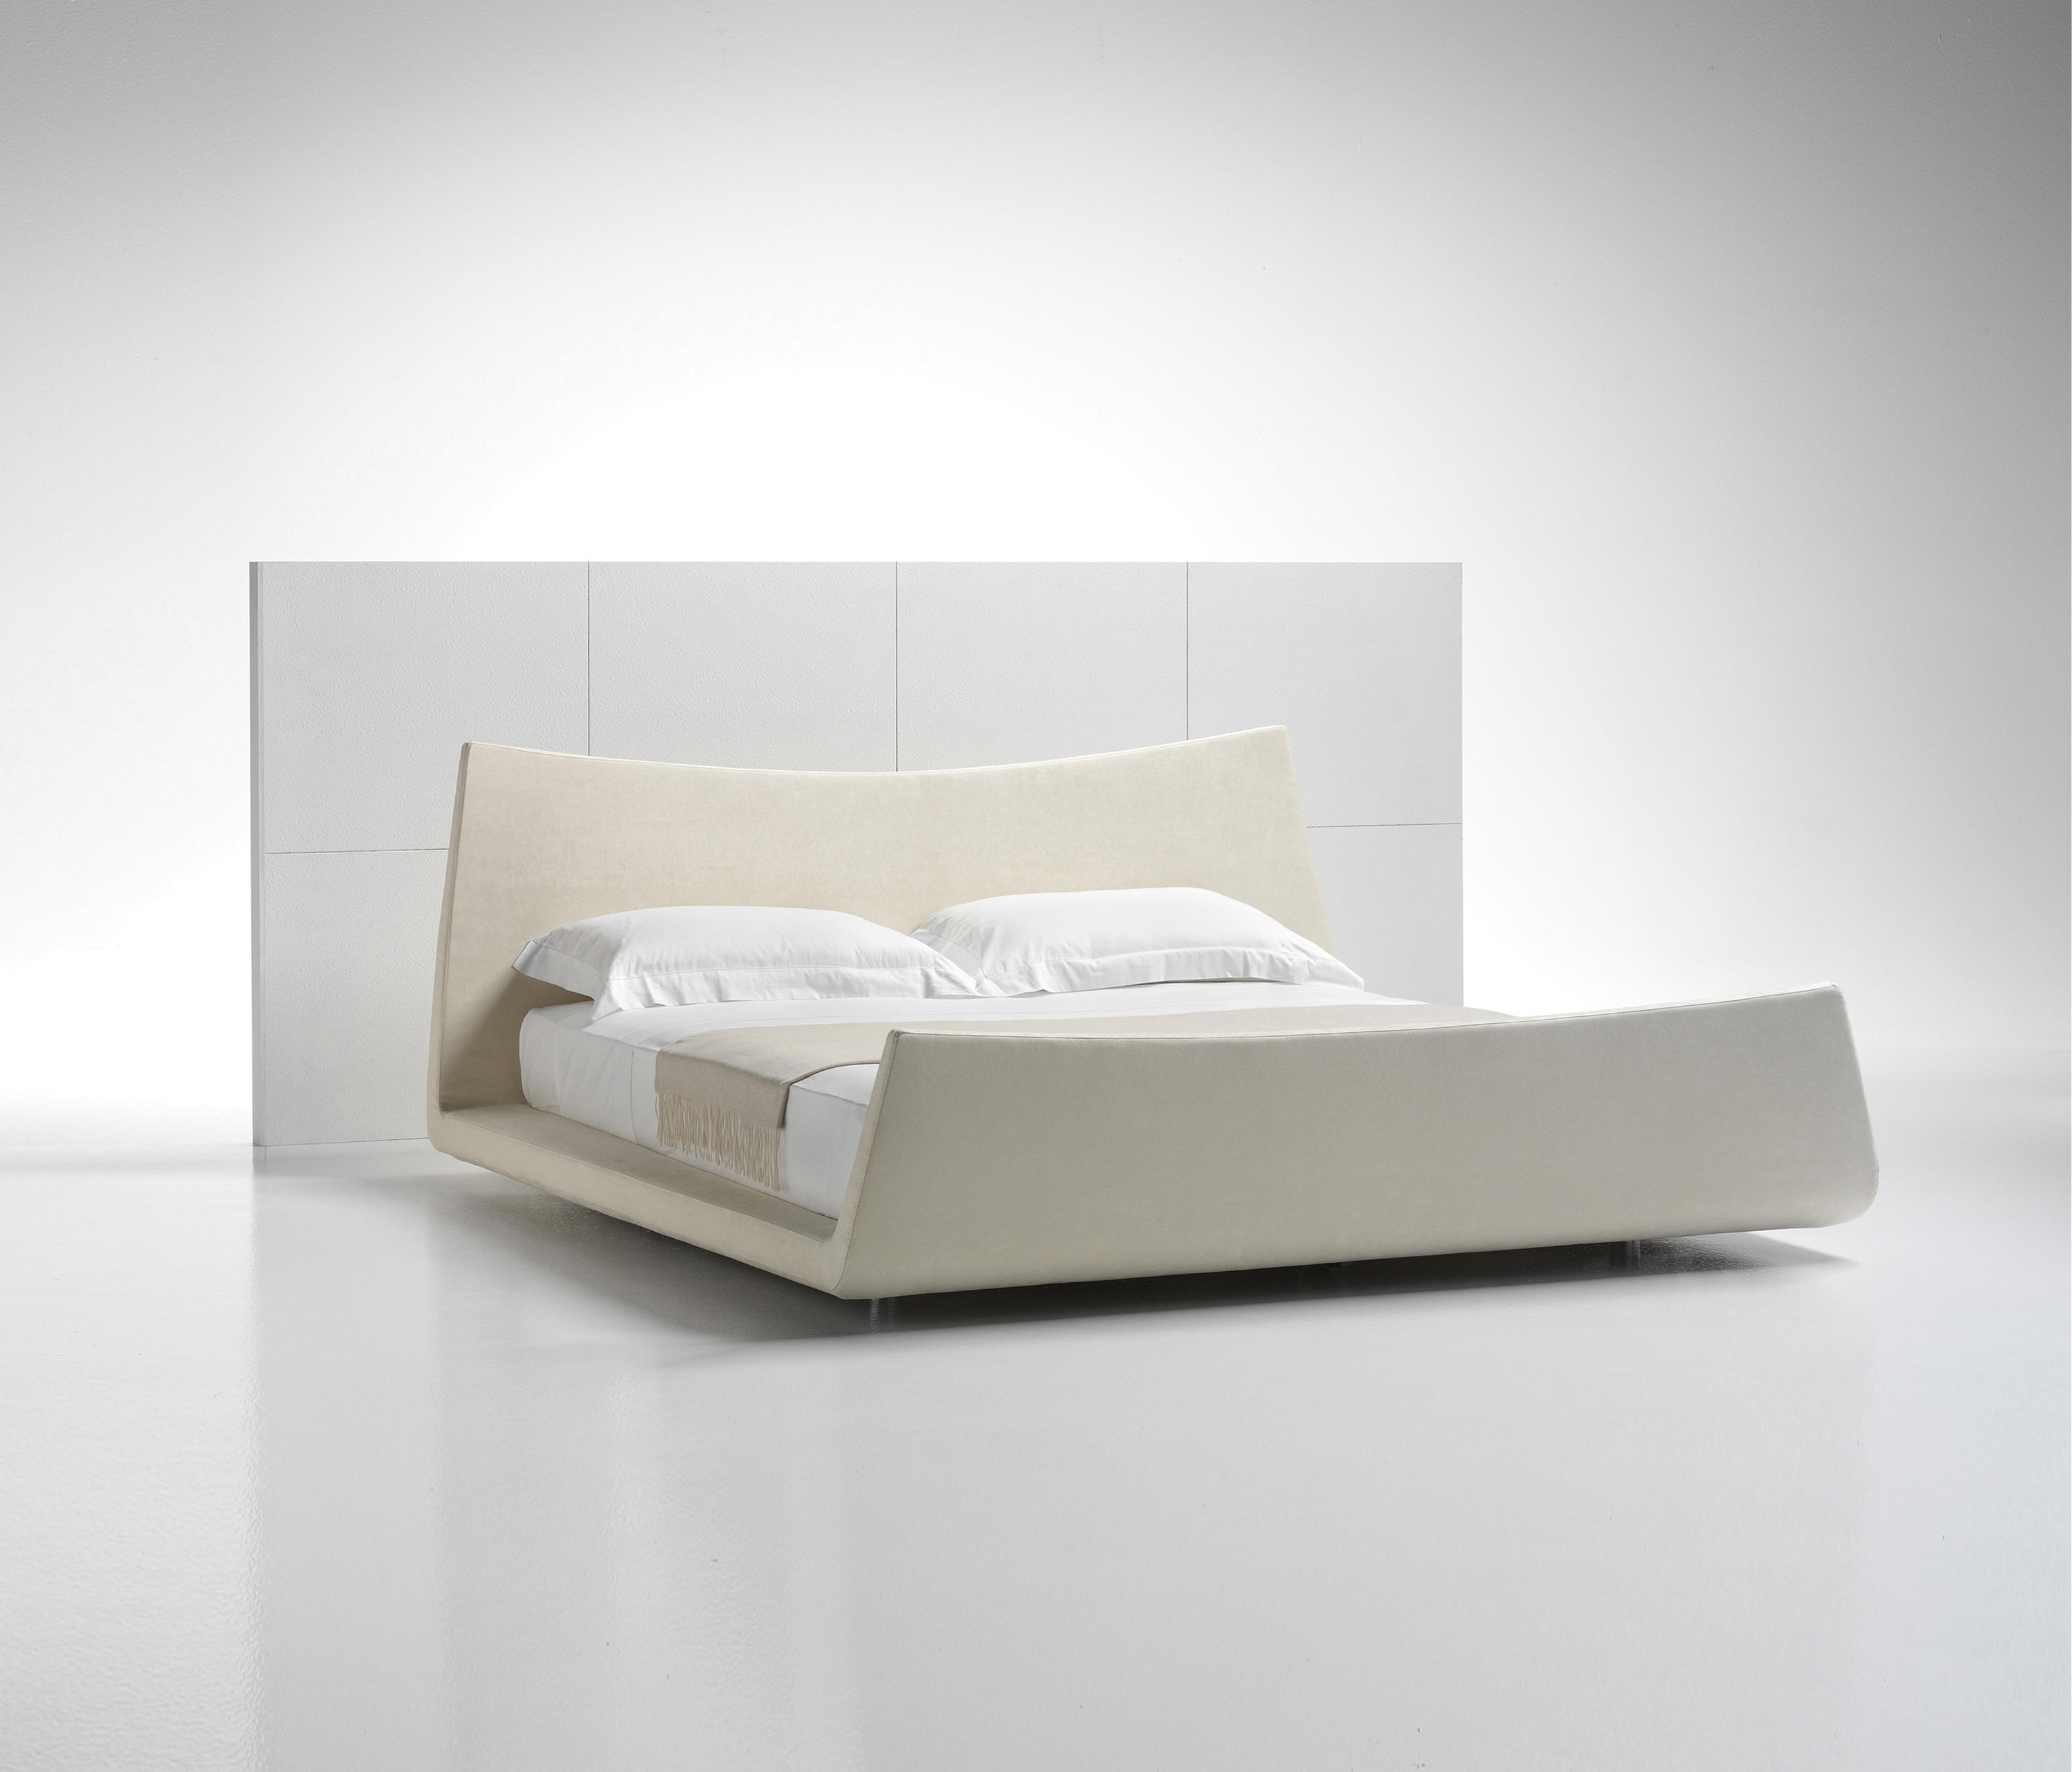 Cocoon Beds - Home Design